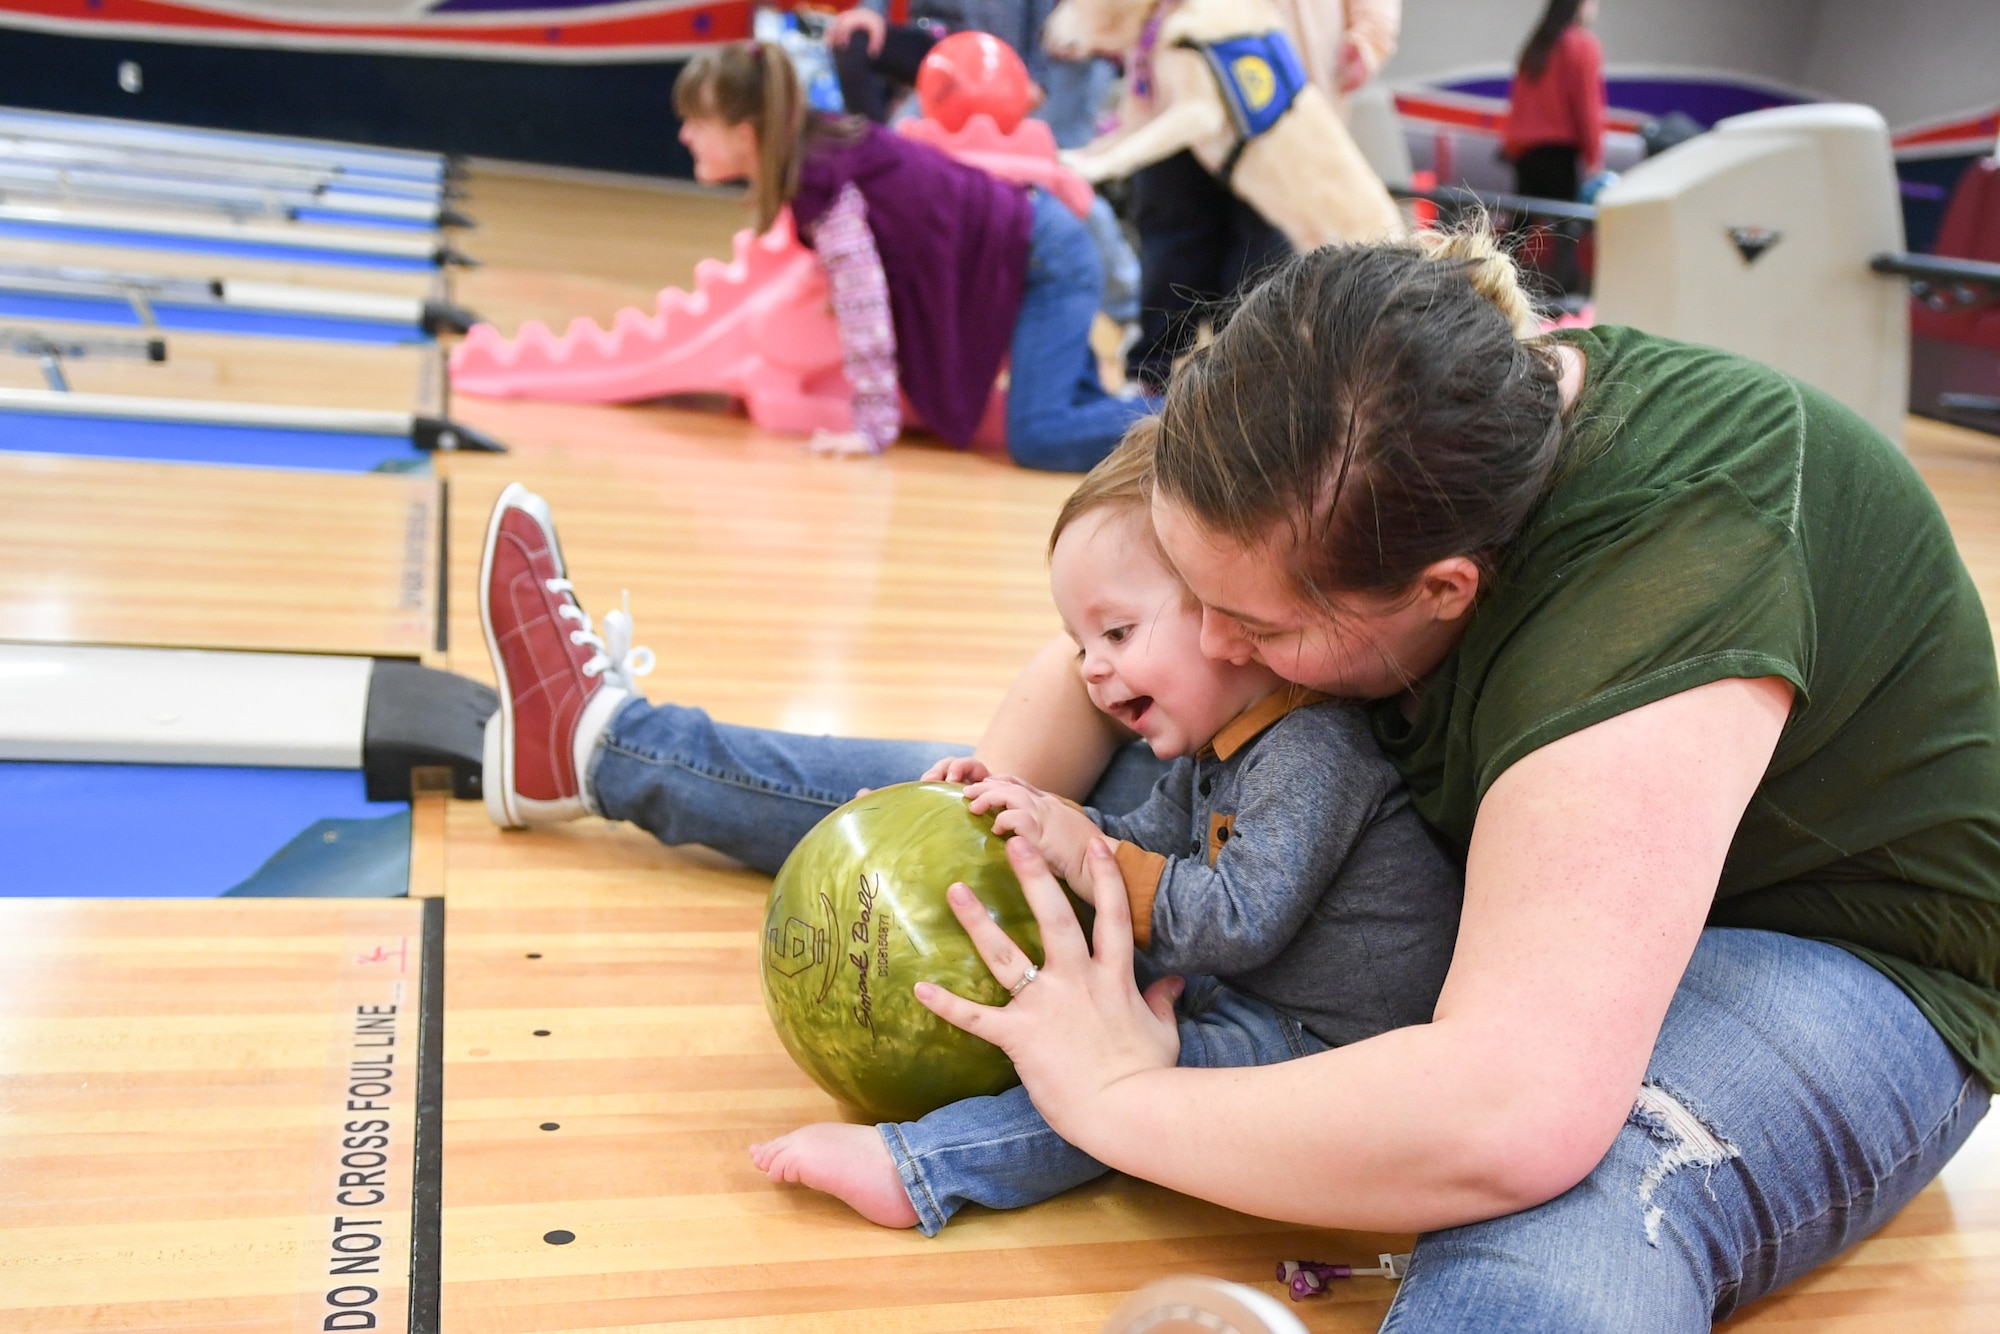 Alyssa Carvajal bowls with her son, Easton, Jan. 30, 2019, at the bowling event held by Exceptional Family Member Program-Family Support at Hill Air Force Base, Utah. (U.S. Air Force photo by Cynthia Griggs)